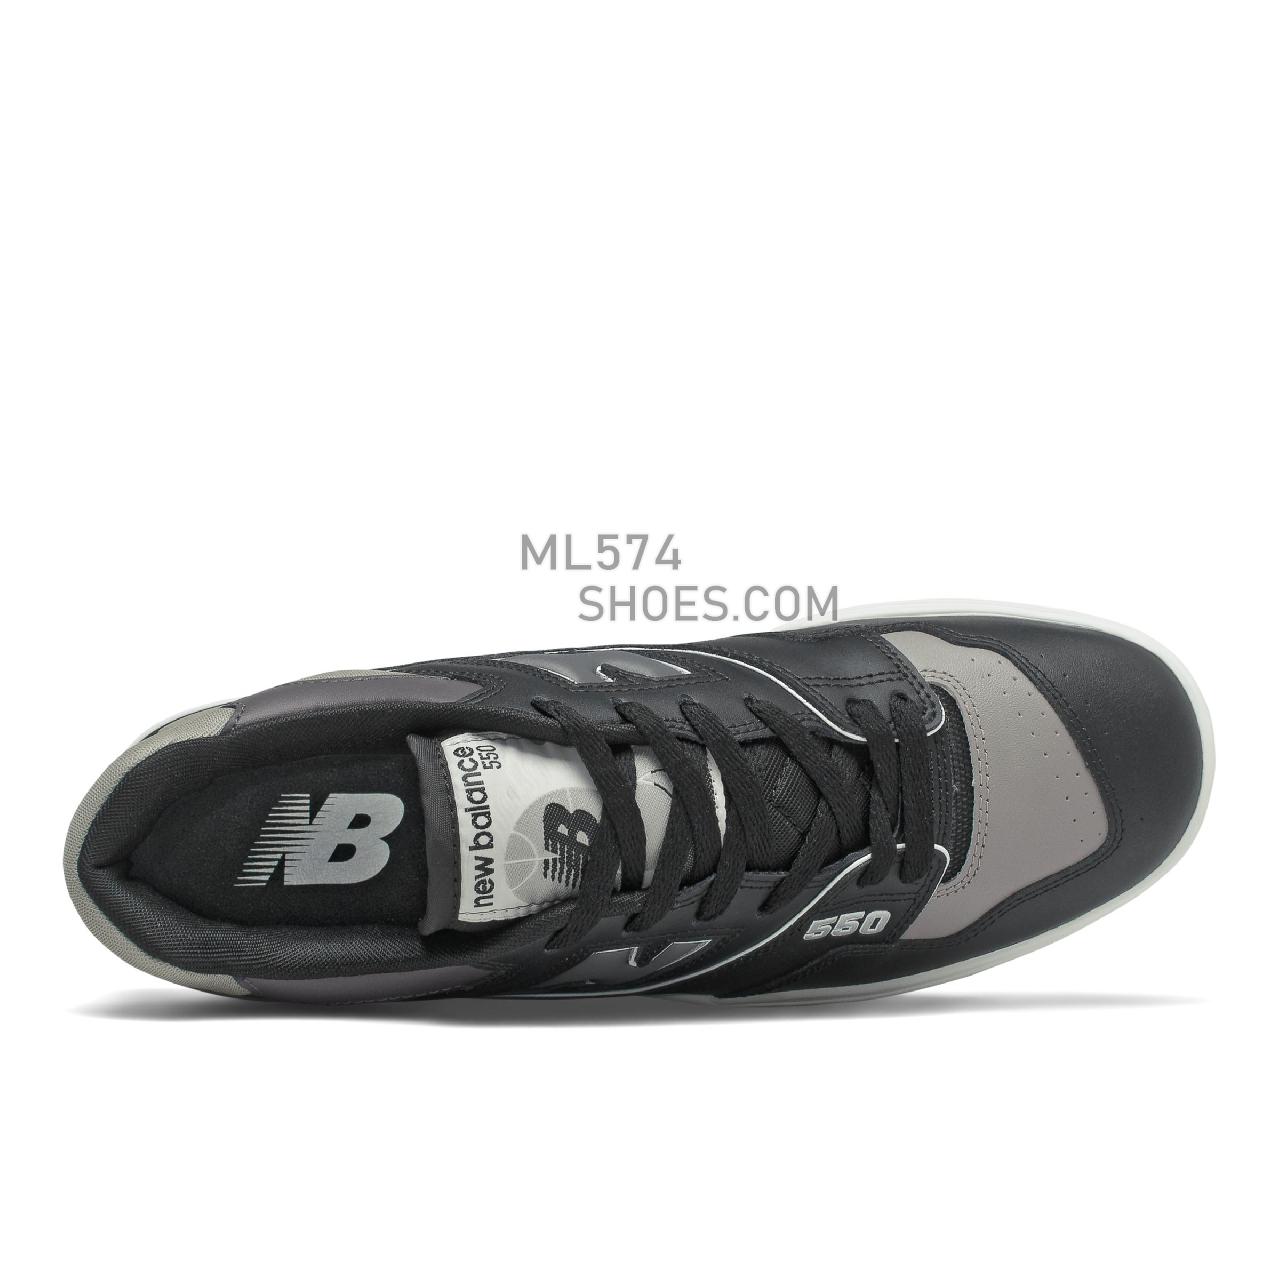 New Balance 550 - Men's Sport Style Sneakers - Black with Marblehead - BB550SR1